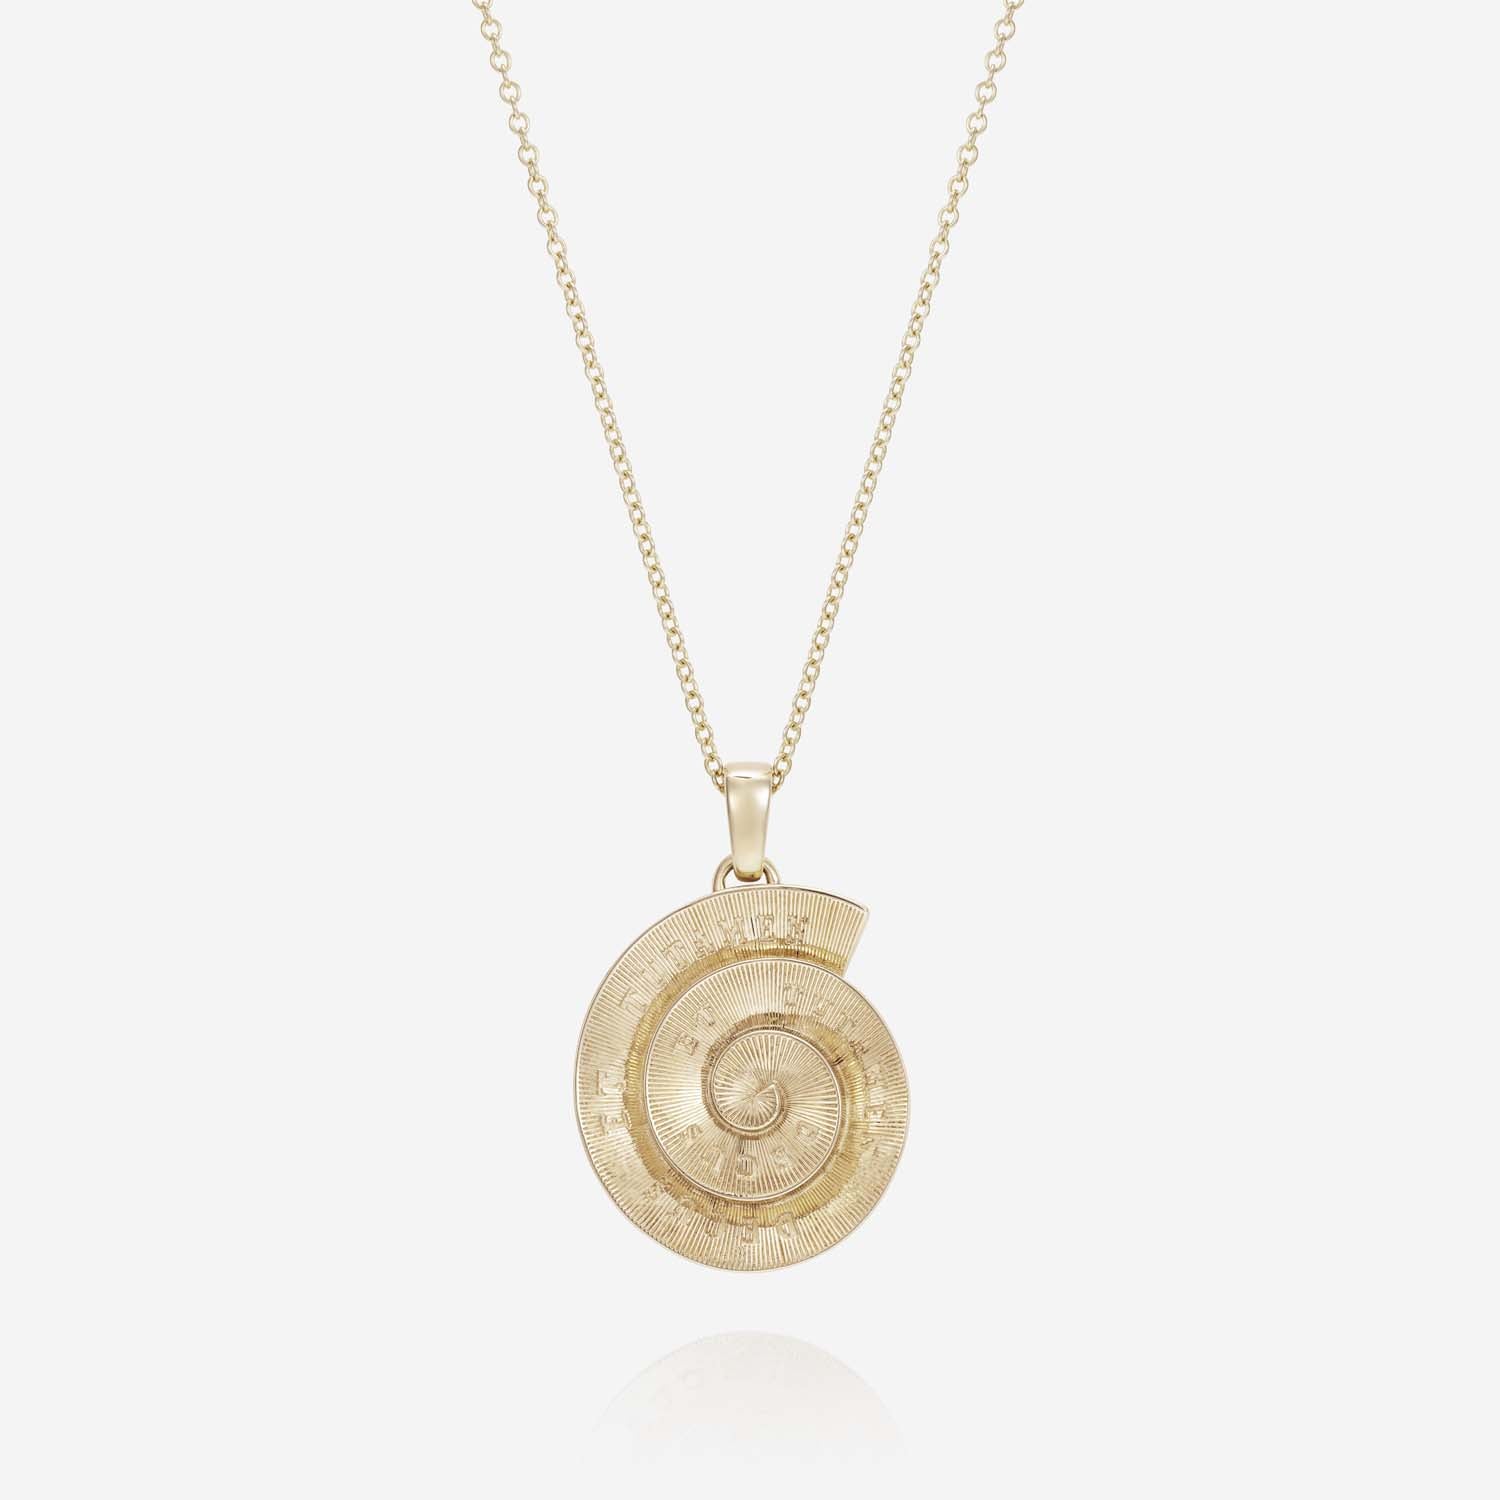 886 Royal Mint Necklaces Tutamen Spiral Pendant with Chain 9ct Yellow Gold